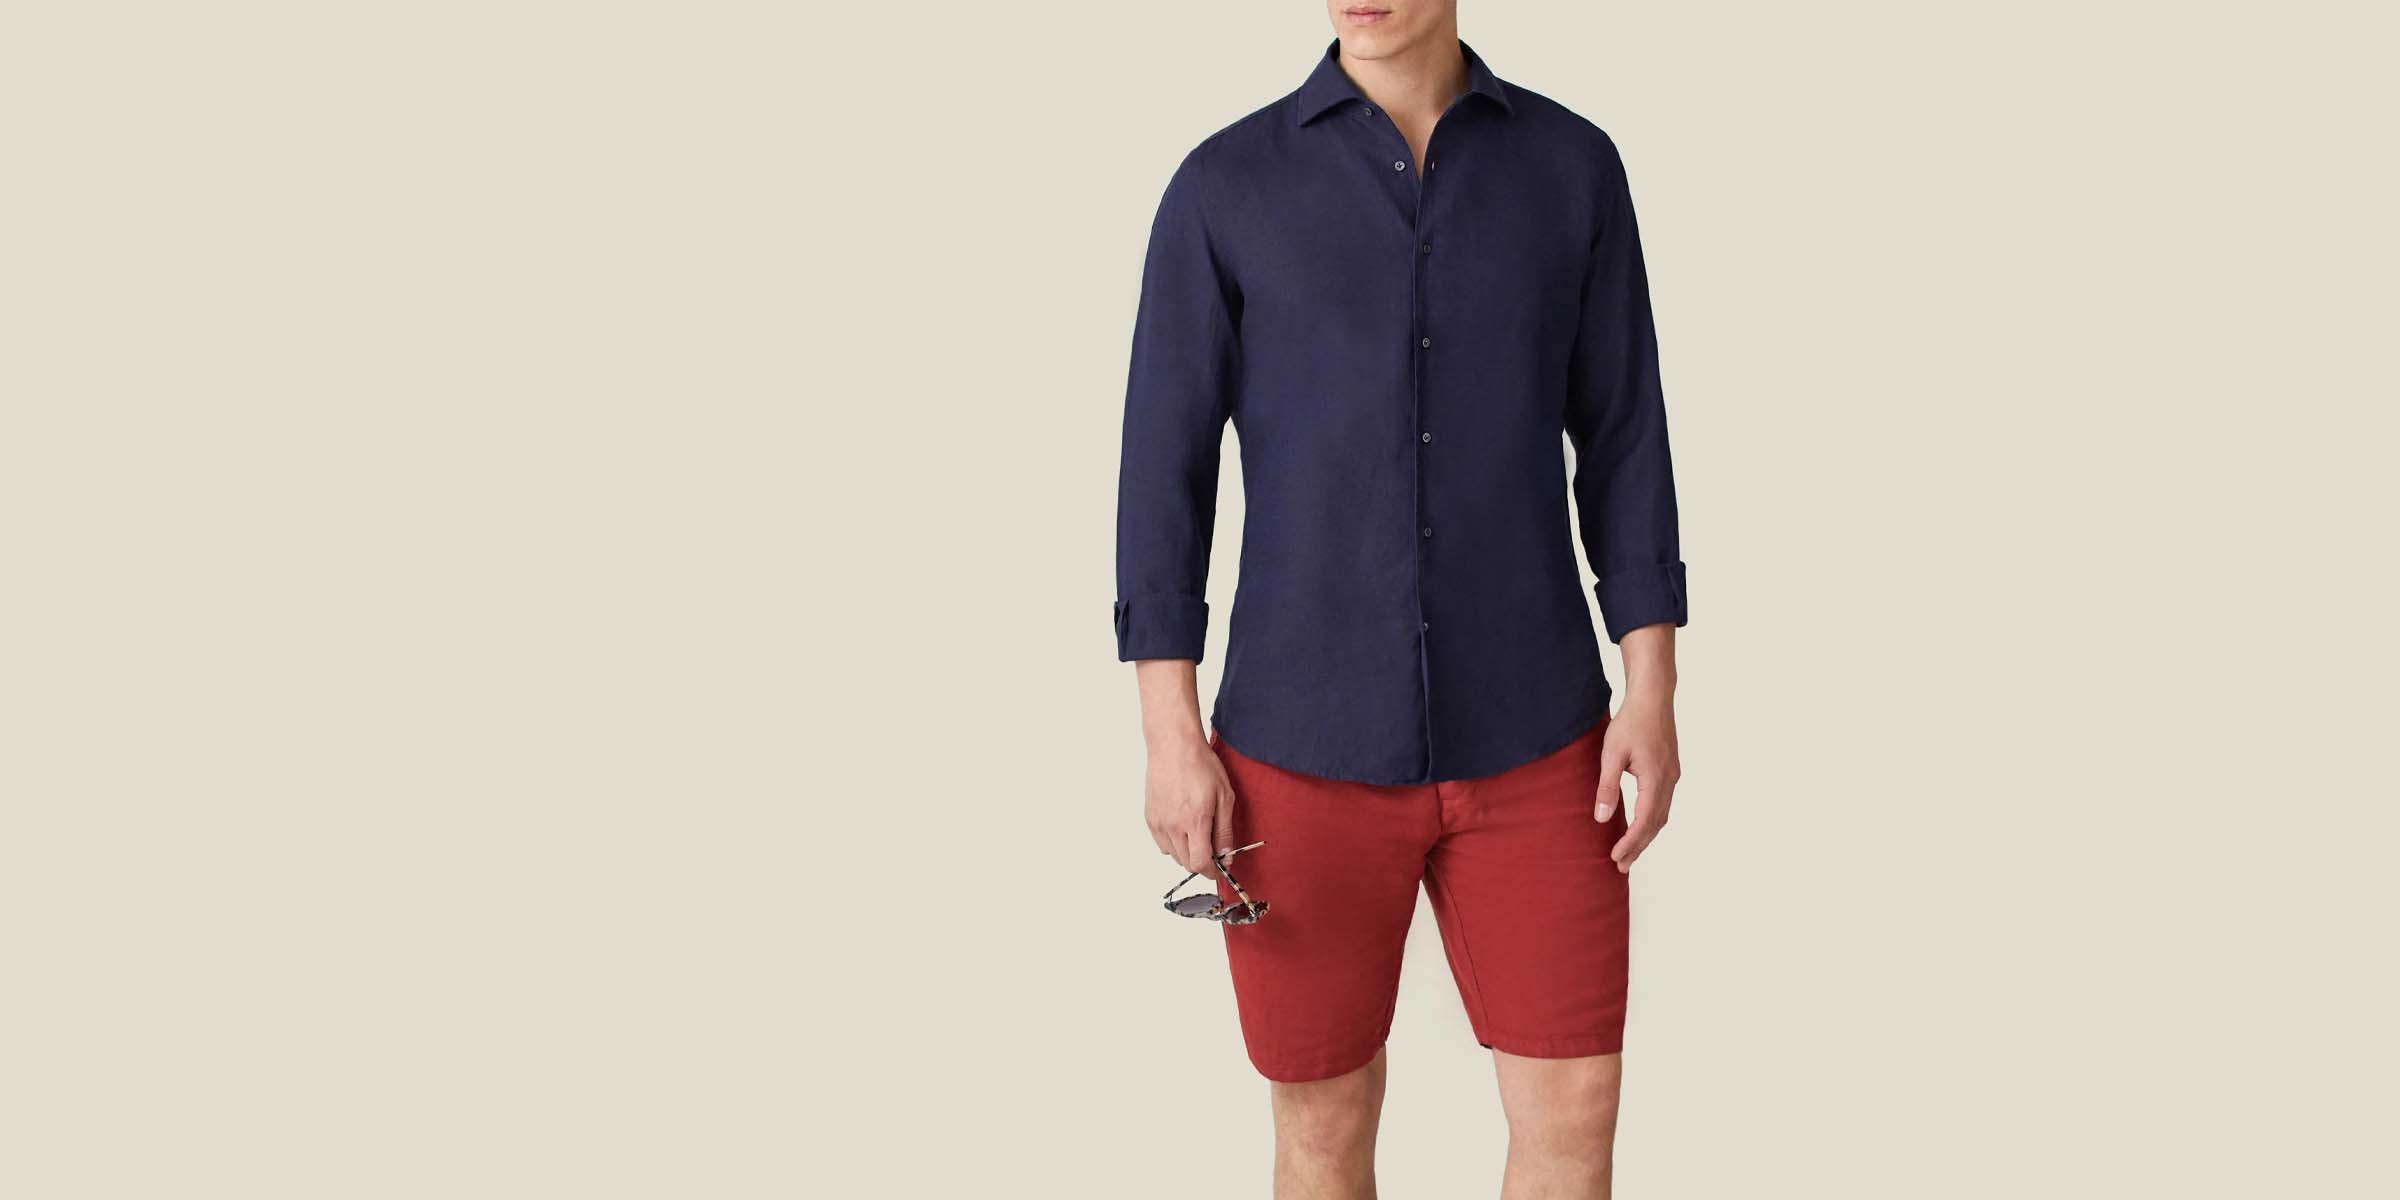 21 Best Linen Shirts For Men To Freshen Up Your Style